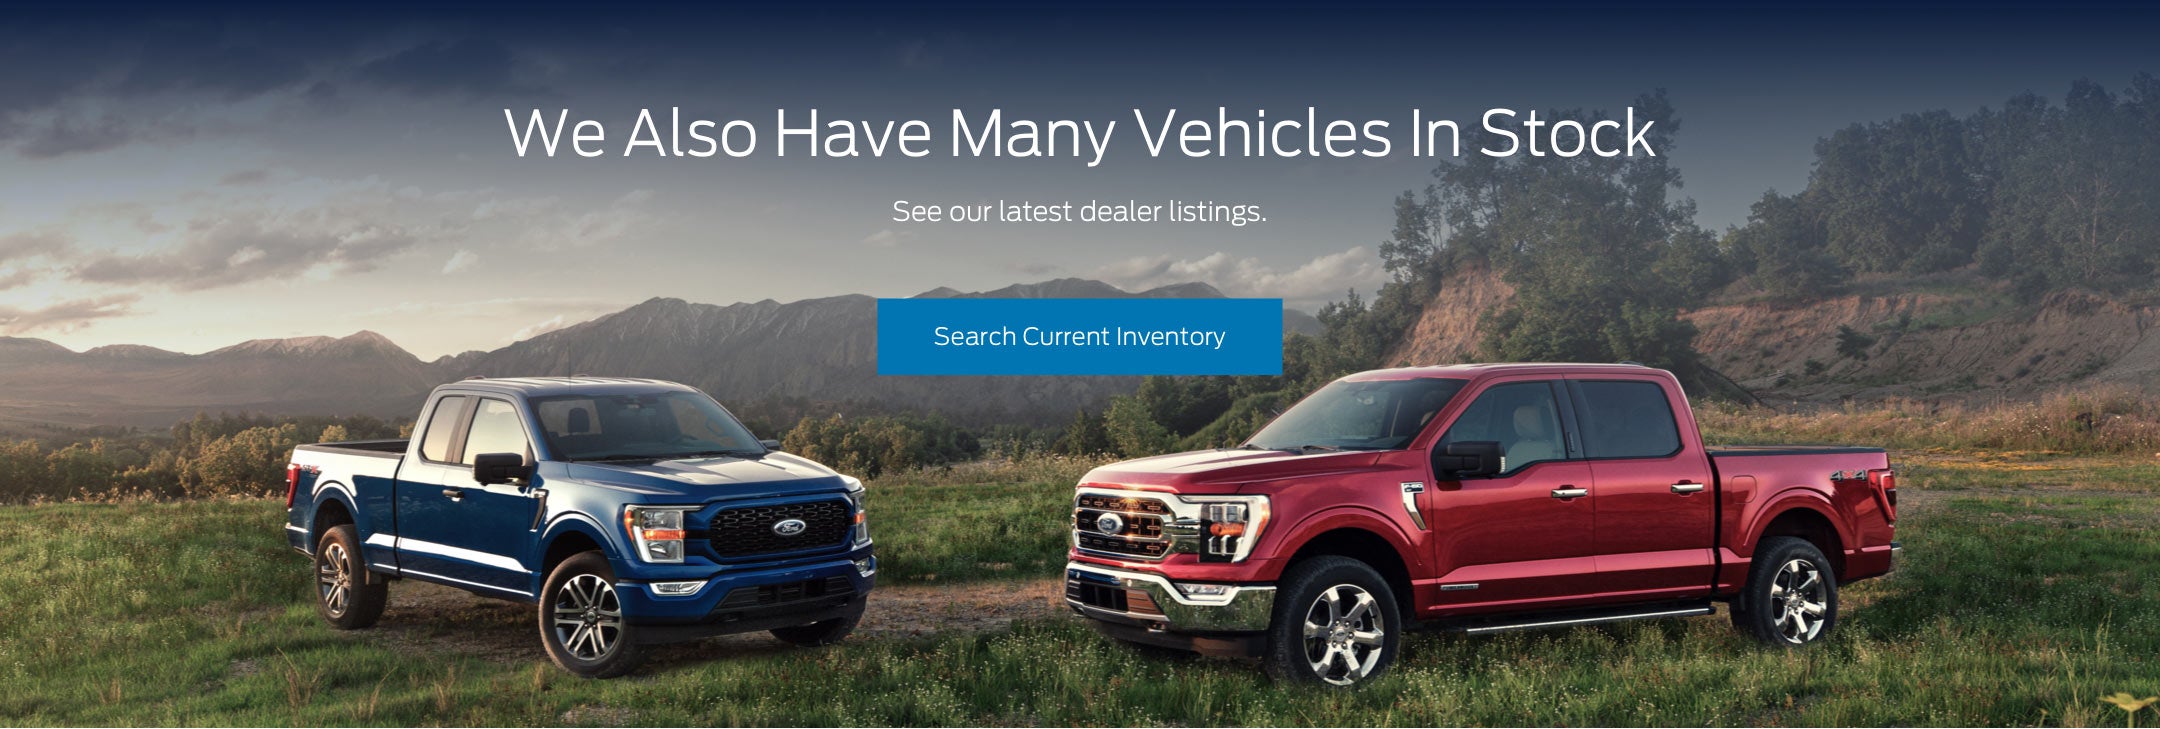 Ford vehicles in stock | Pilson Ford in Mattoon IL